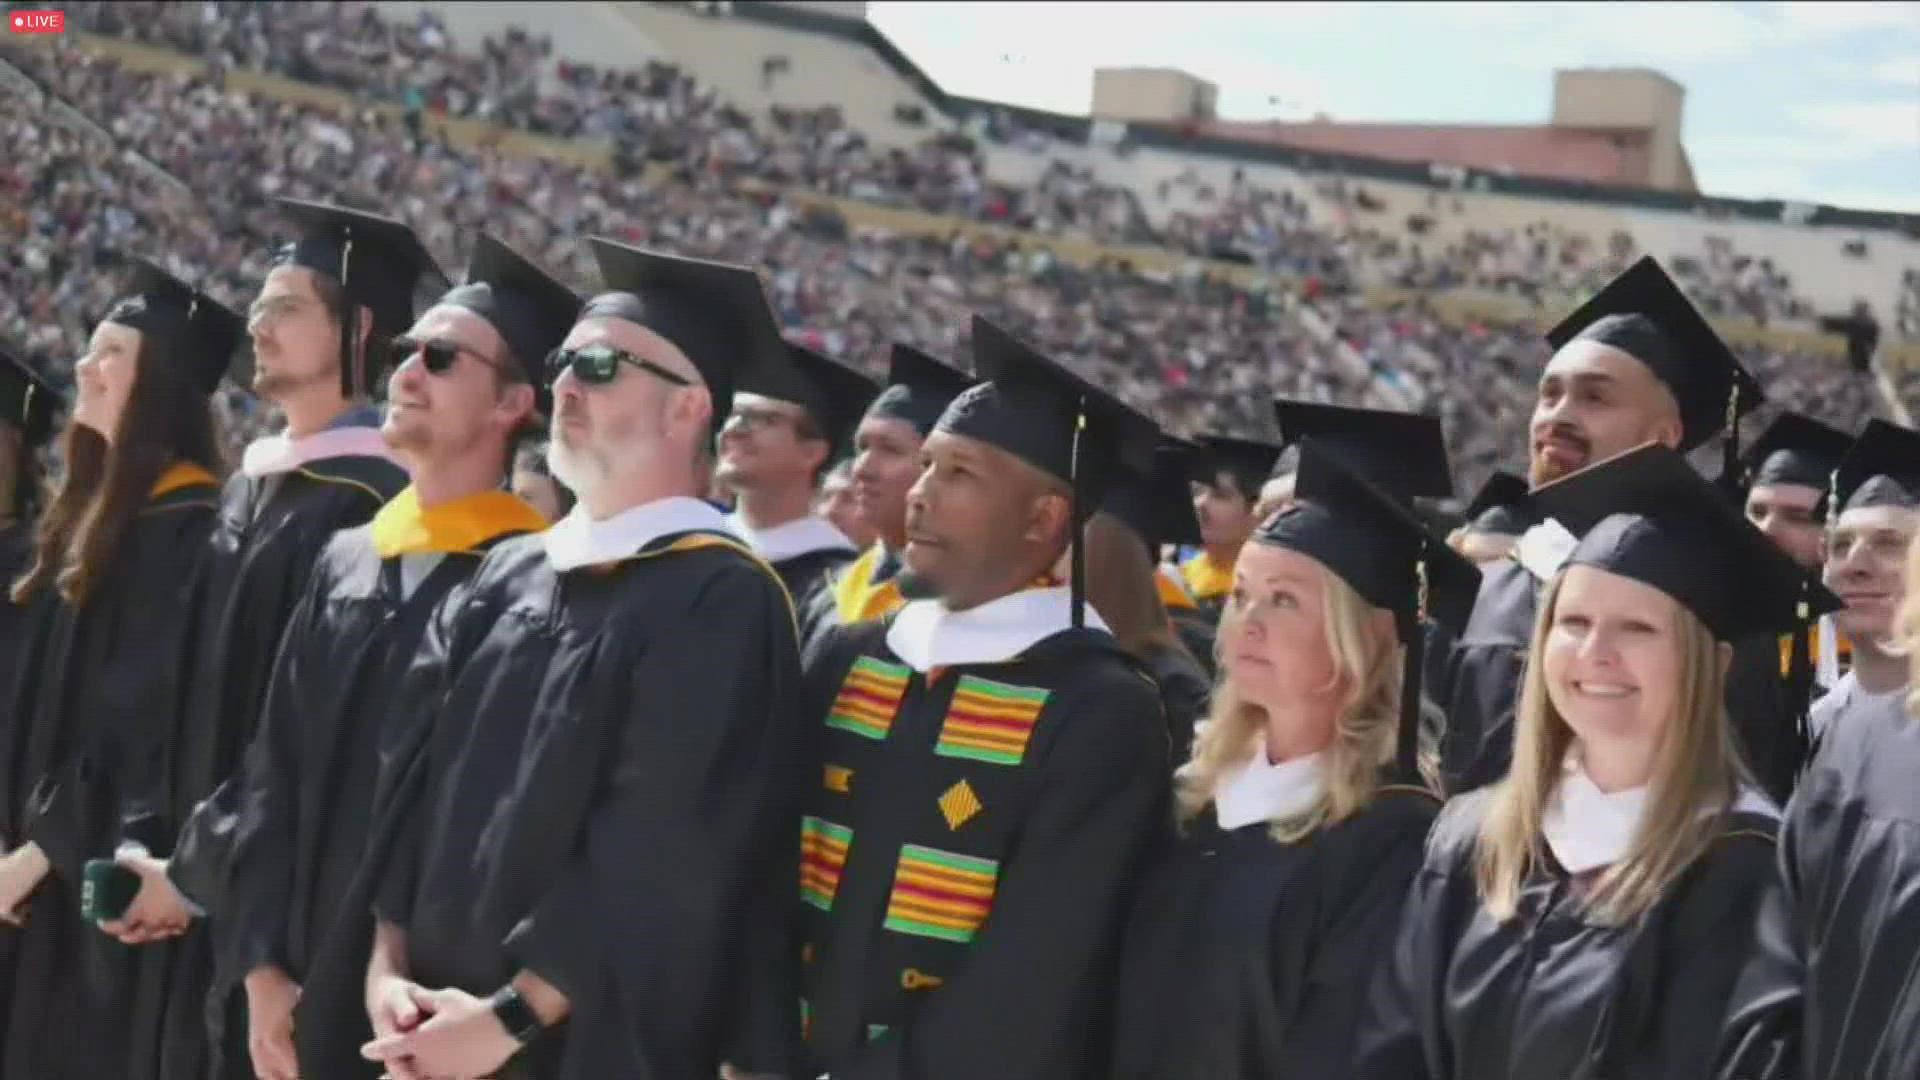 cu-boulder-commencement-returns-in-person-may-5-at-folsom-field-9news